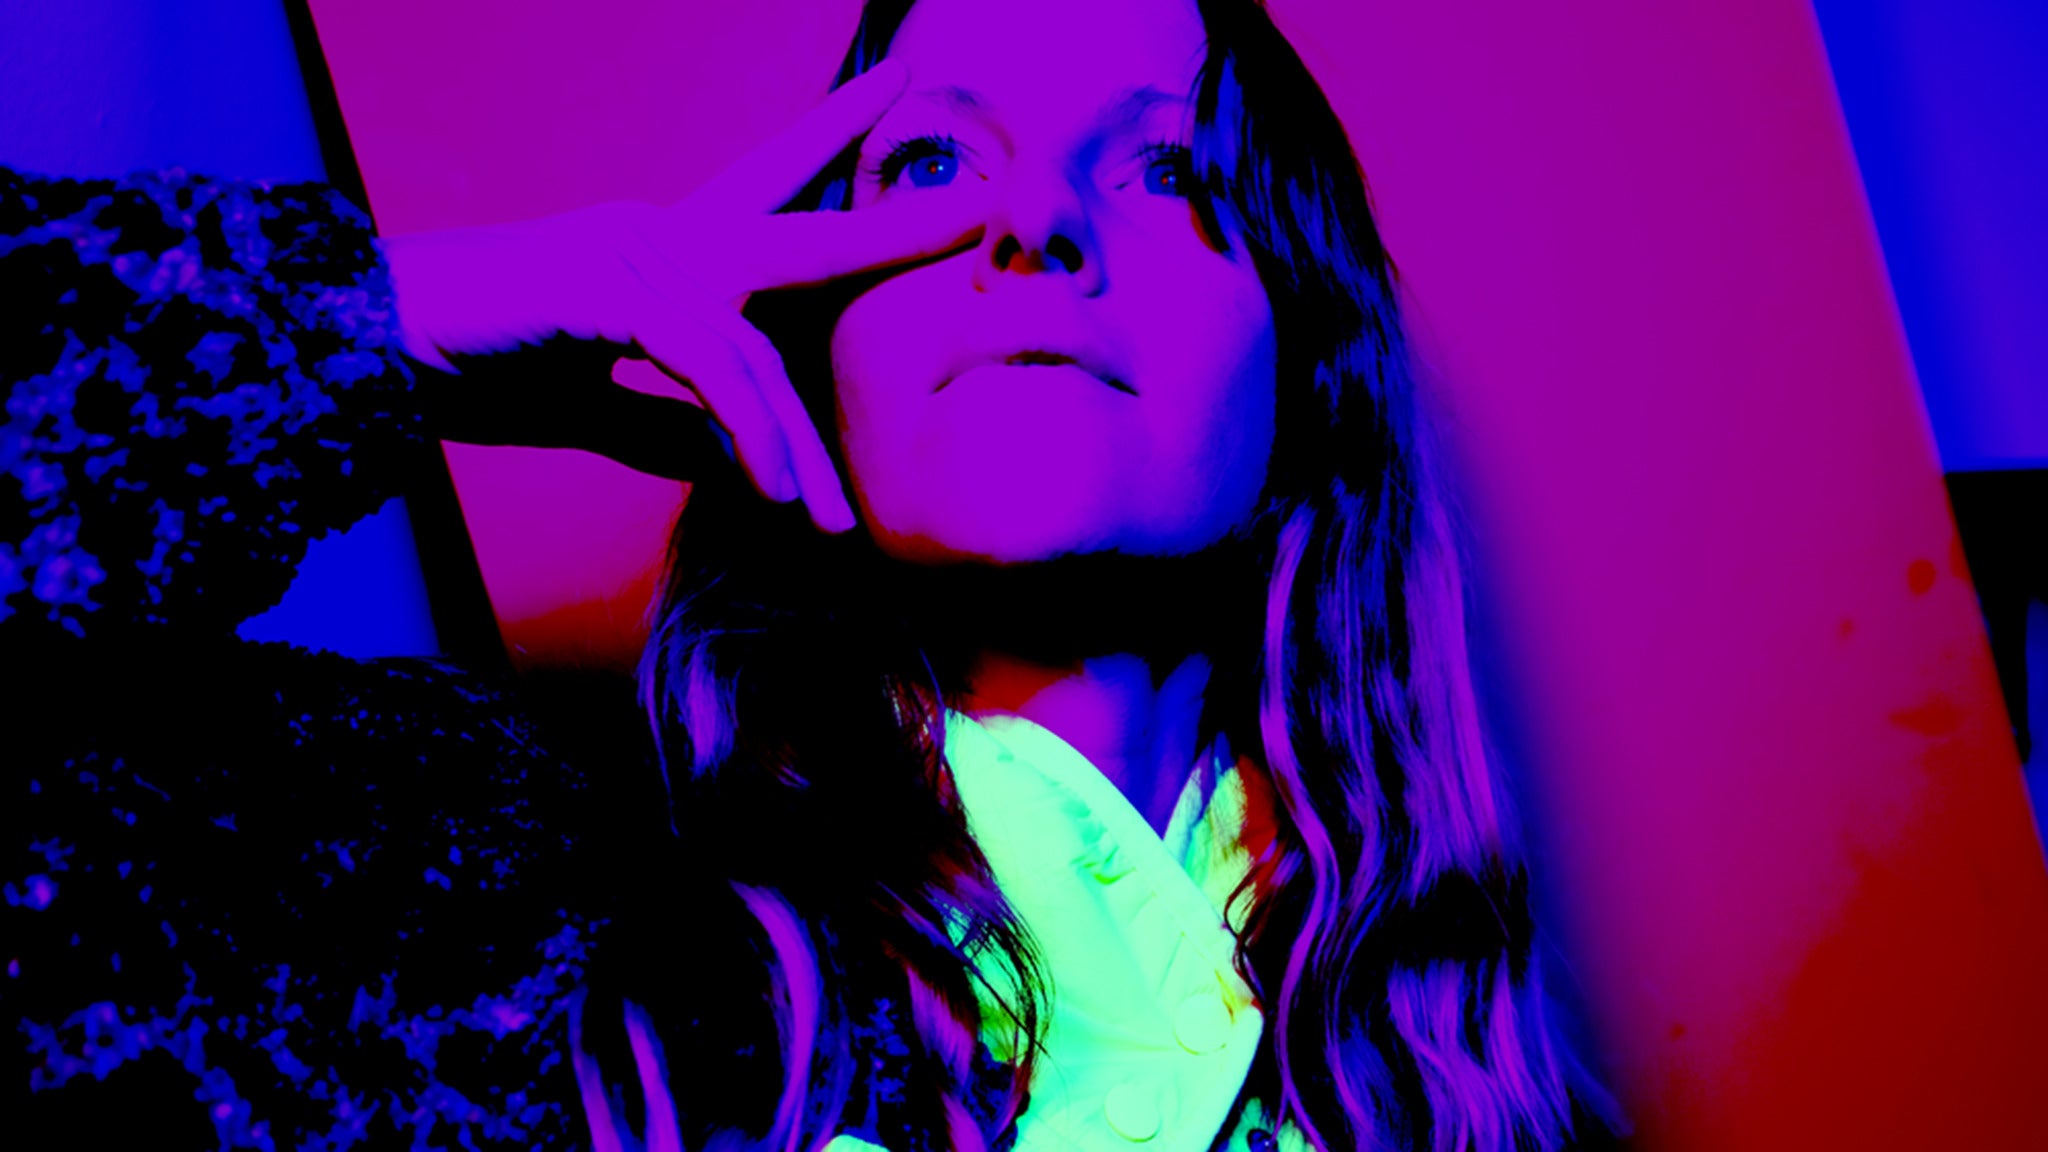 Kaitlyn Aurelia Smith in Los Angeles promo photo for Day of Show presale offer code